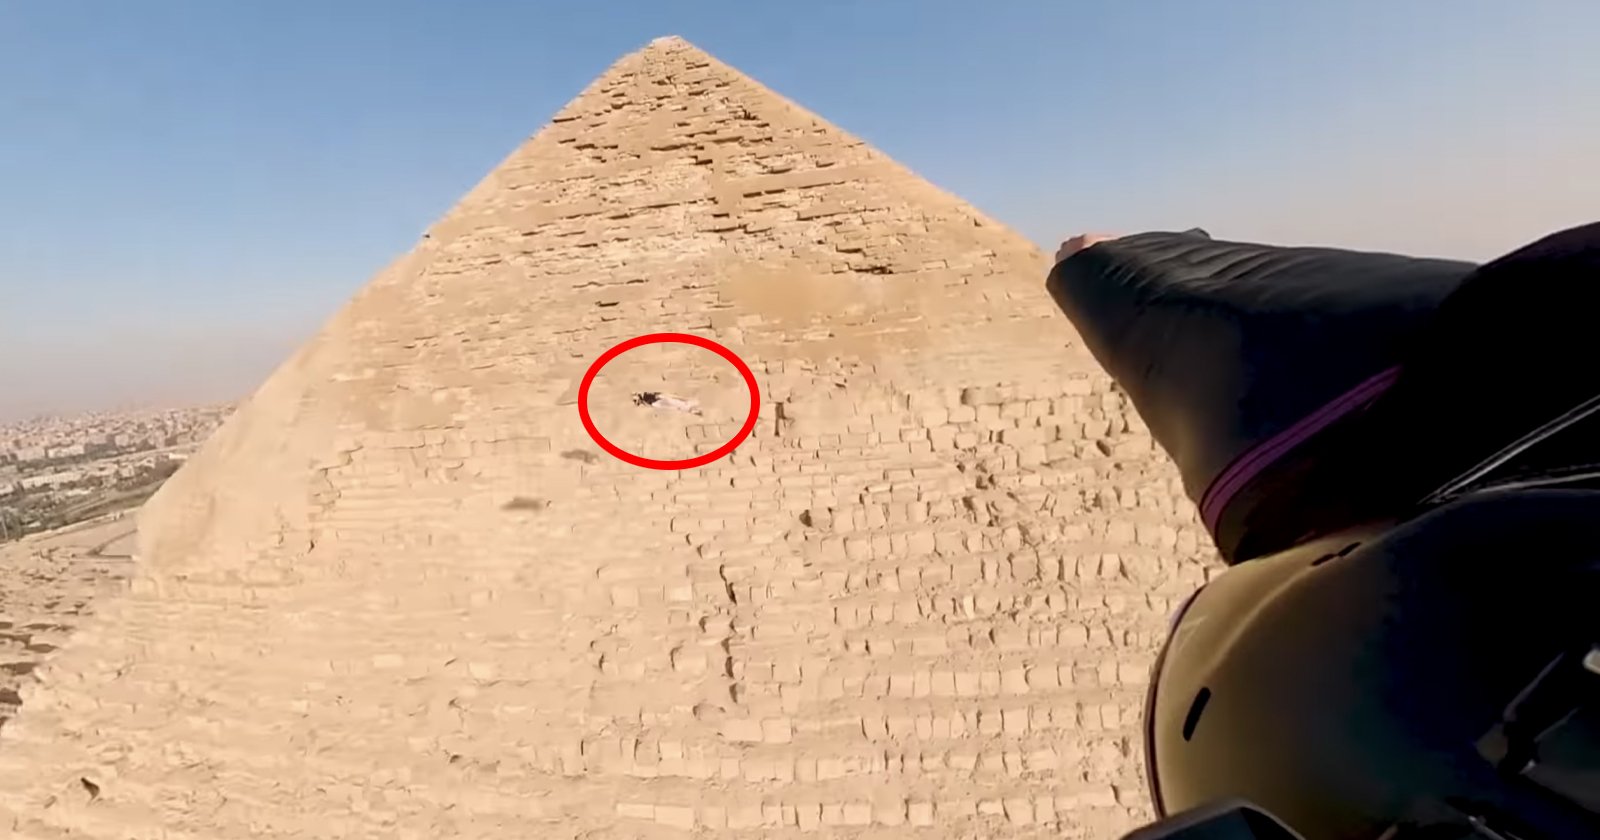 Wingsuit Footage from Egyptian Pyramids